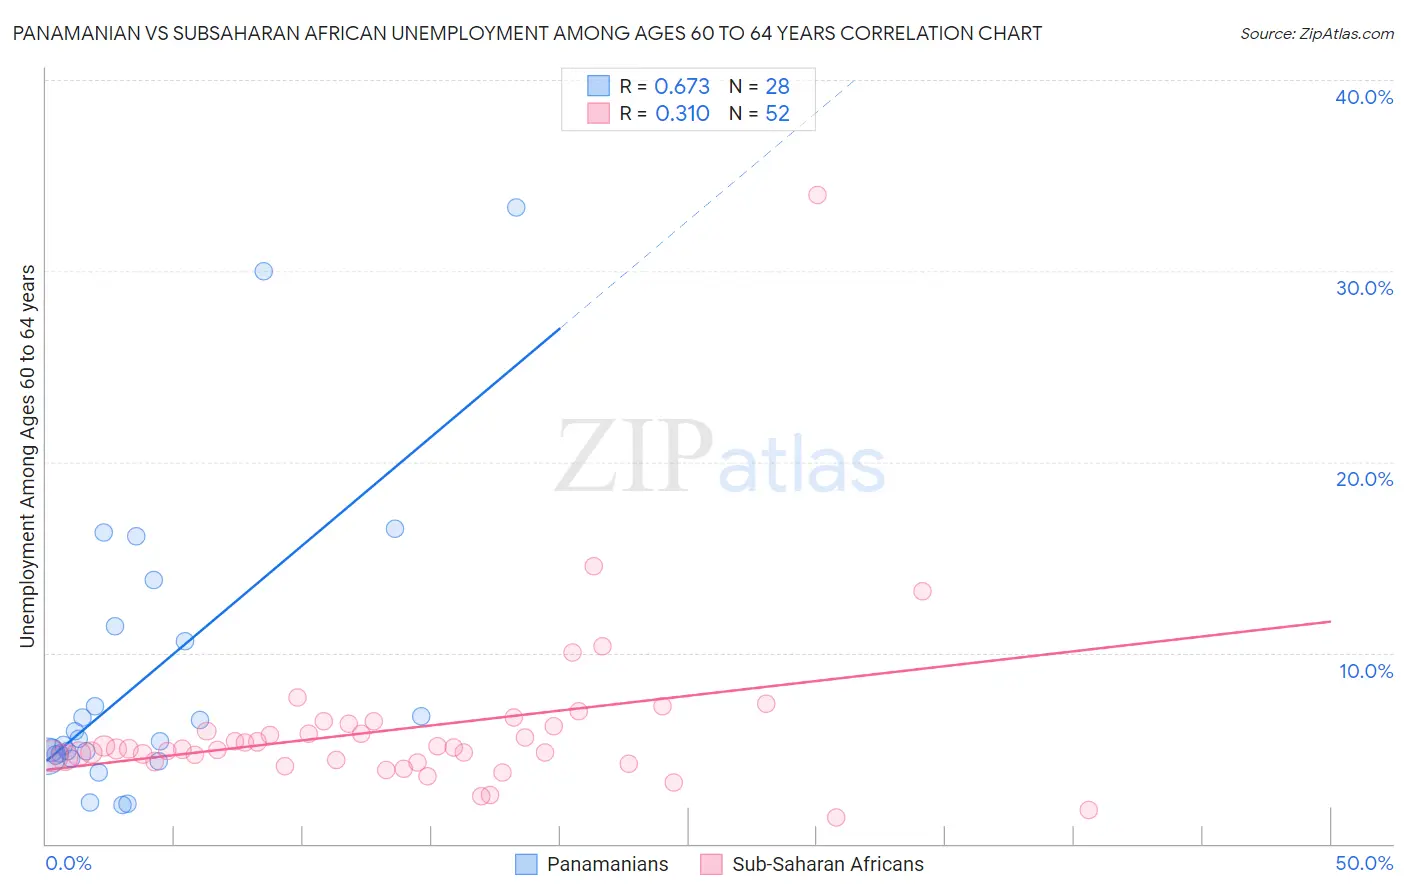 Panamanian vs Subsaharan African Unemployment Among Ages 60 to 64 years